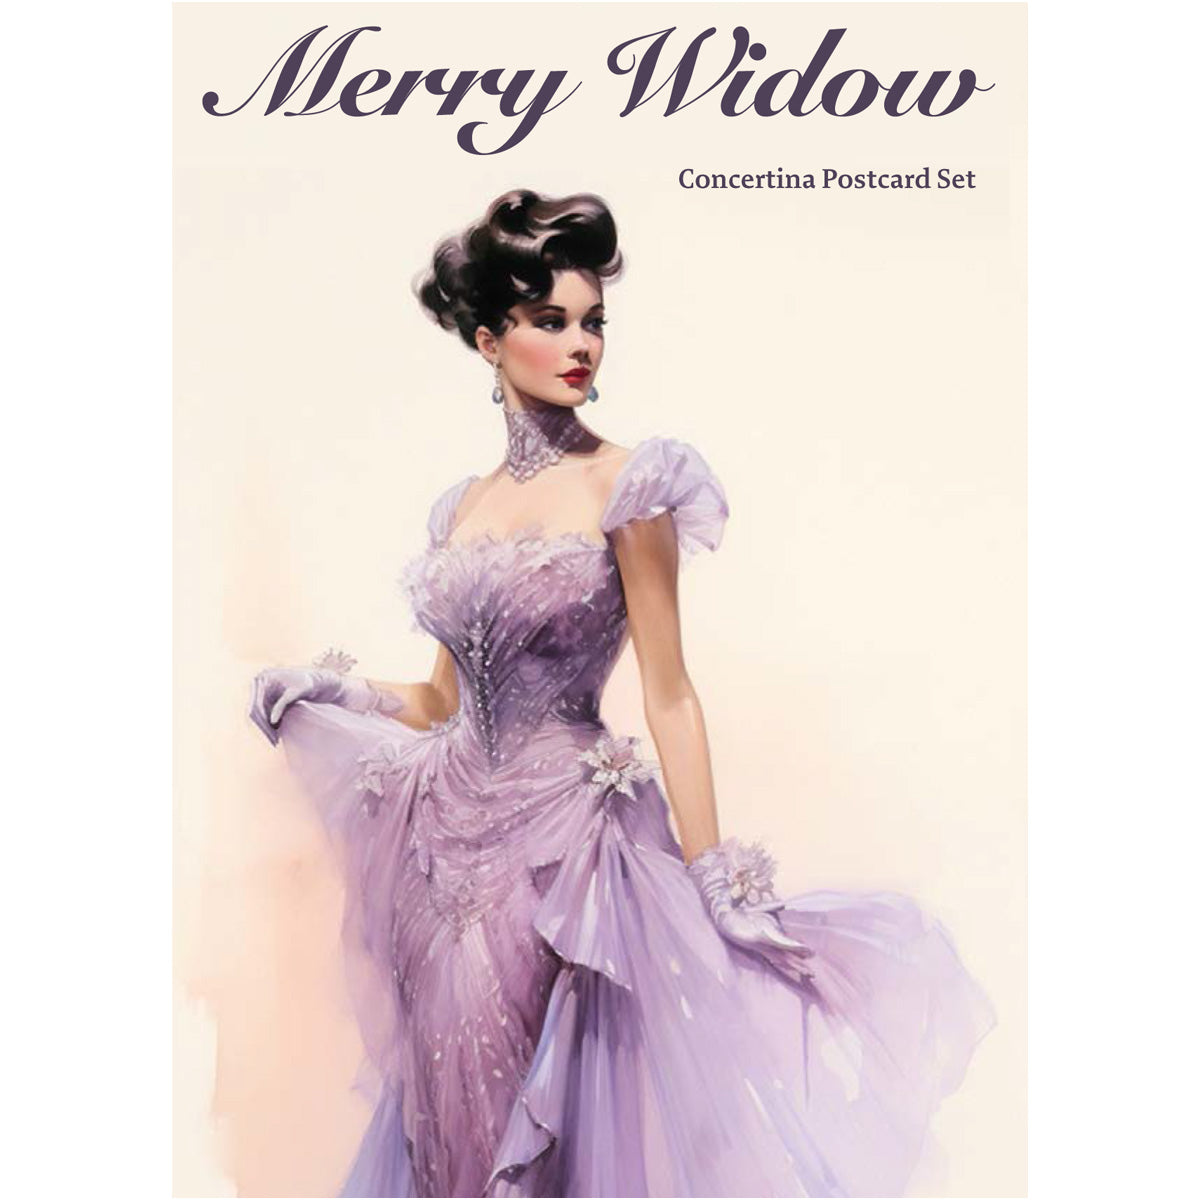 The Merry Widow Glyndebourne Concertina Postcard Pack